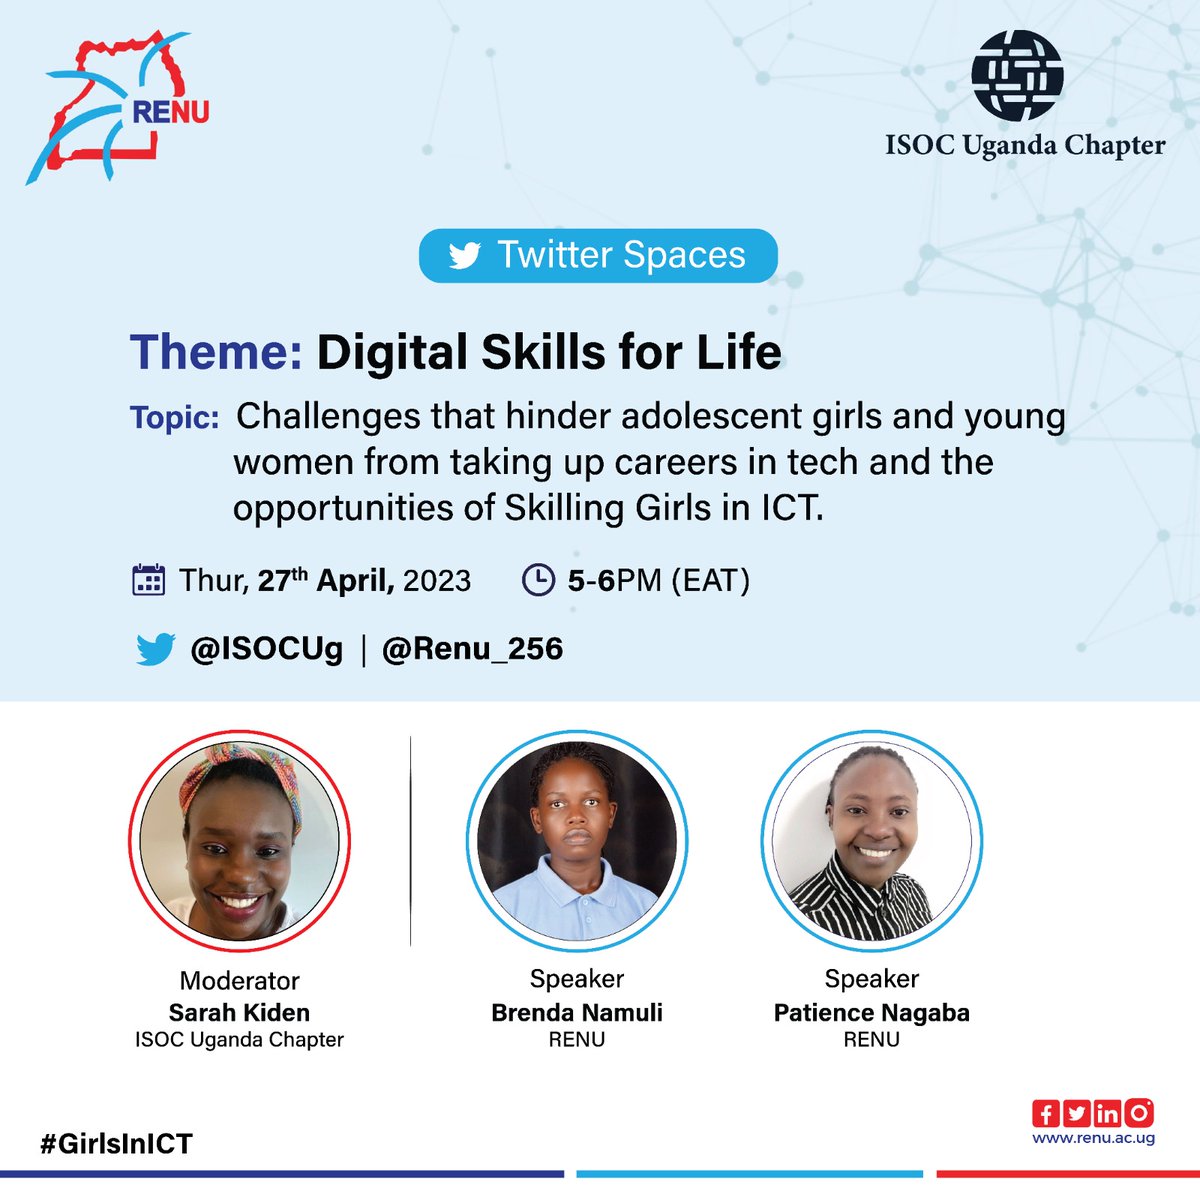 Girls in ICT Day

We are excited to be joining the conversation on Digital Skills for Life on the @ISOCUg Twitter Space!

Our very own @nagabapatie & @bnamuli98 will be panelists during this discussion.

#GirlInICT  #GirlsInICTDay